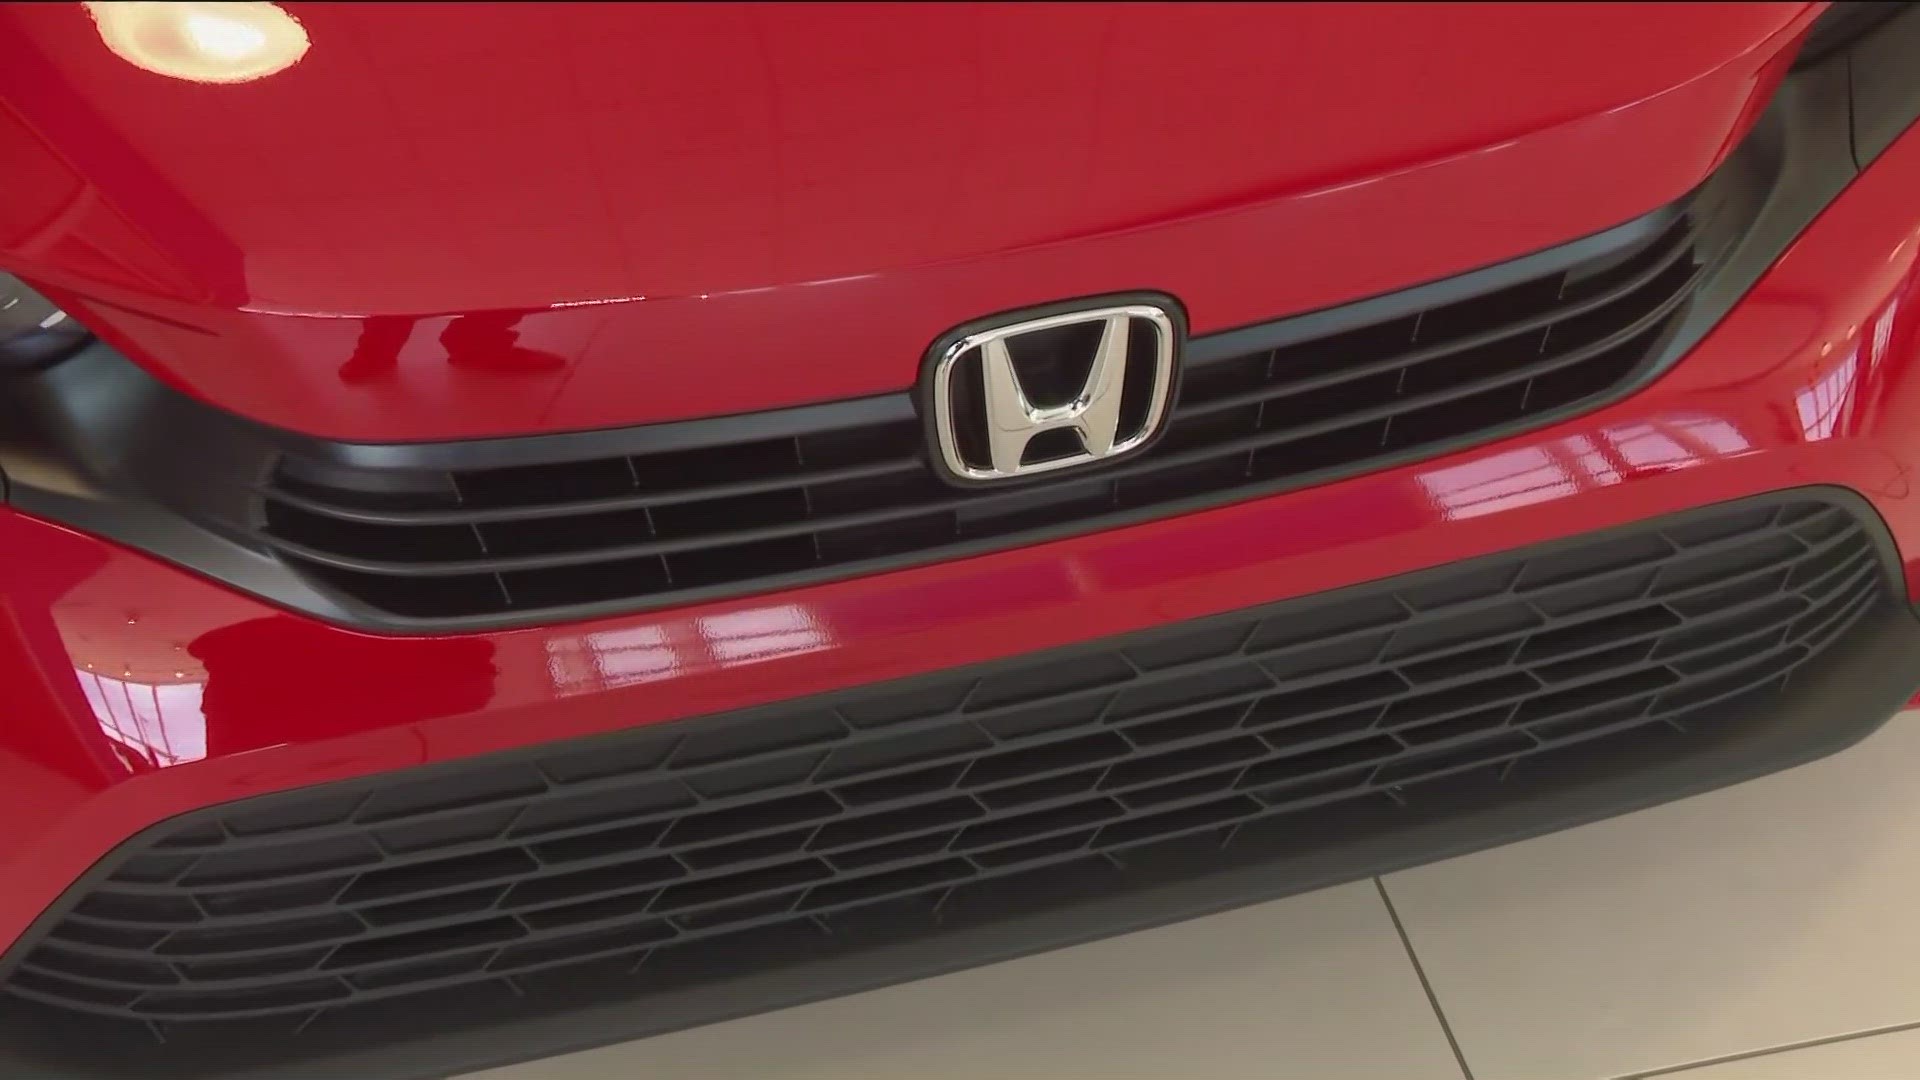 WTOL 11 Chief Meteorologist visits Jim White Honda in Maumee where he previews the 2023 Honda Civic LX, one of the prizes in the St. Jude Dream Home Giveaway.